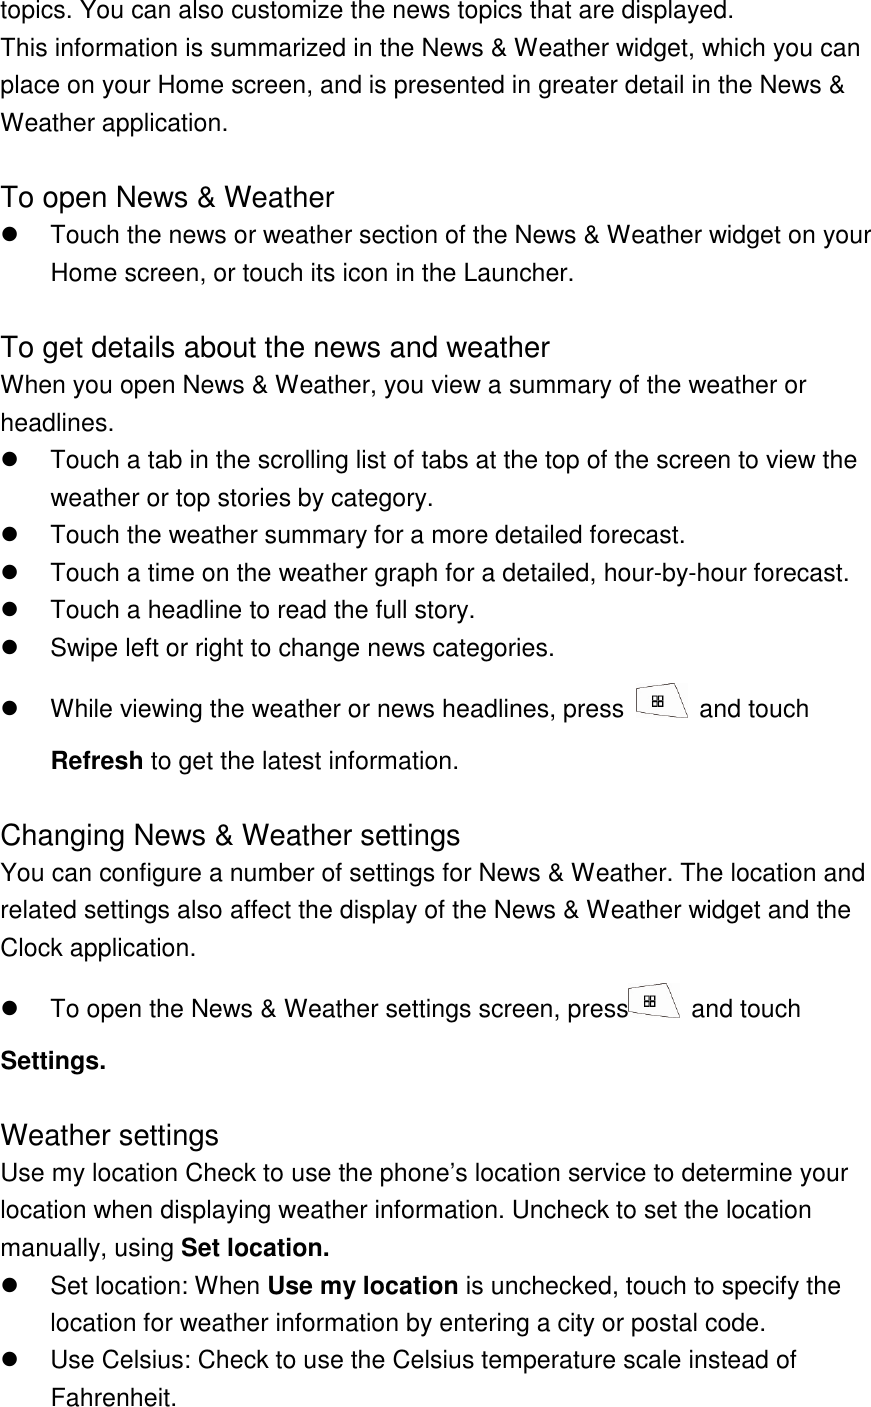 topics. You can also customize the news topics that are displayed. This information is summarized in the News &amp; Weather widget, which you can place on your Home screen, and is presented in greater detail in the News &amp; Weather application.  To open News &amp; Weather   Touch the news or weather section of the News &amp; Weather widget on your Home screen, or touch its icon in the Launcher.  To get details about the news and weather When you open News &amp; Weather, you view a summary of the weather or headlines.   Touch a tab in the scrolling list of tabs at the top of the screen to view the weather or top stories by category.     Touch the weather summary for a more detailed forecast.   Touch a time on the weather graph for a detailed, hour-by-hour forecast.   Touch a headline to read the full story.   Swipe left or right to change news categories.   While viewing the weather or news headlines, press    and touch Refresh to get the latest information.  Changing News &amp; Weather settings You can configure a number of settings for News &amp; Weather. The location and related settings also affect the display of the News &amp; Weather widget and the Clock application.   To open the News &amp; Weather settings screen, press   and touch Settings.  Weather settings Use my location Check to use the phone’s location service to determine your location when displaying weather information. Uncheck to set the location manually, using Set location.   Set location: When Use my location is unchecked, touch to specify the location for weather information by entering a city or postal code.   Use Celsius: Check to use the Celsius temperature scale instead of Fahrenheit. 